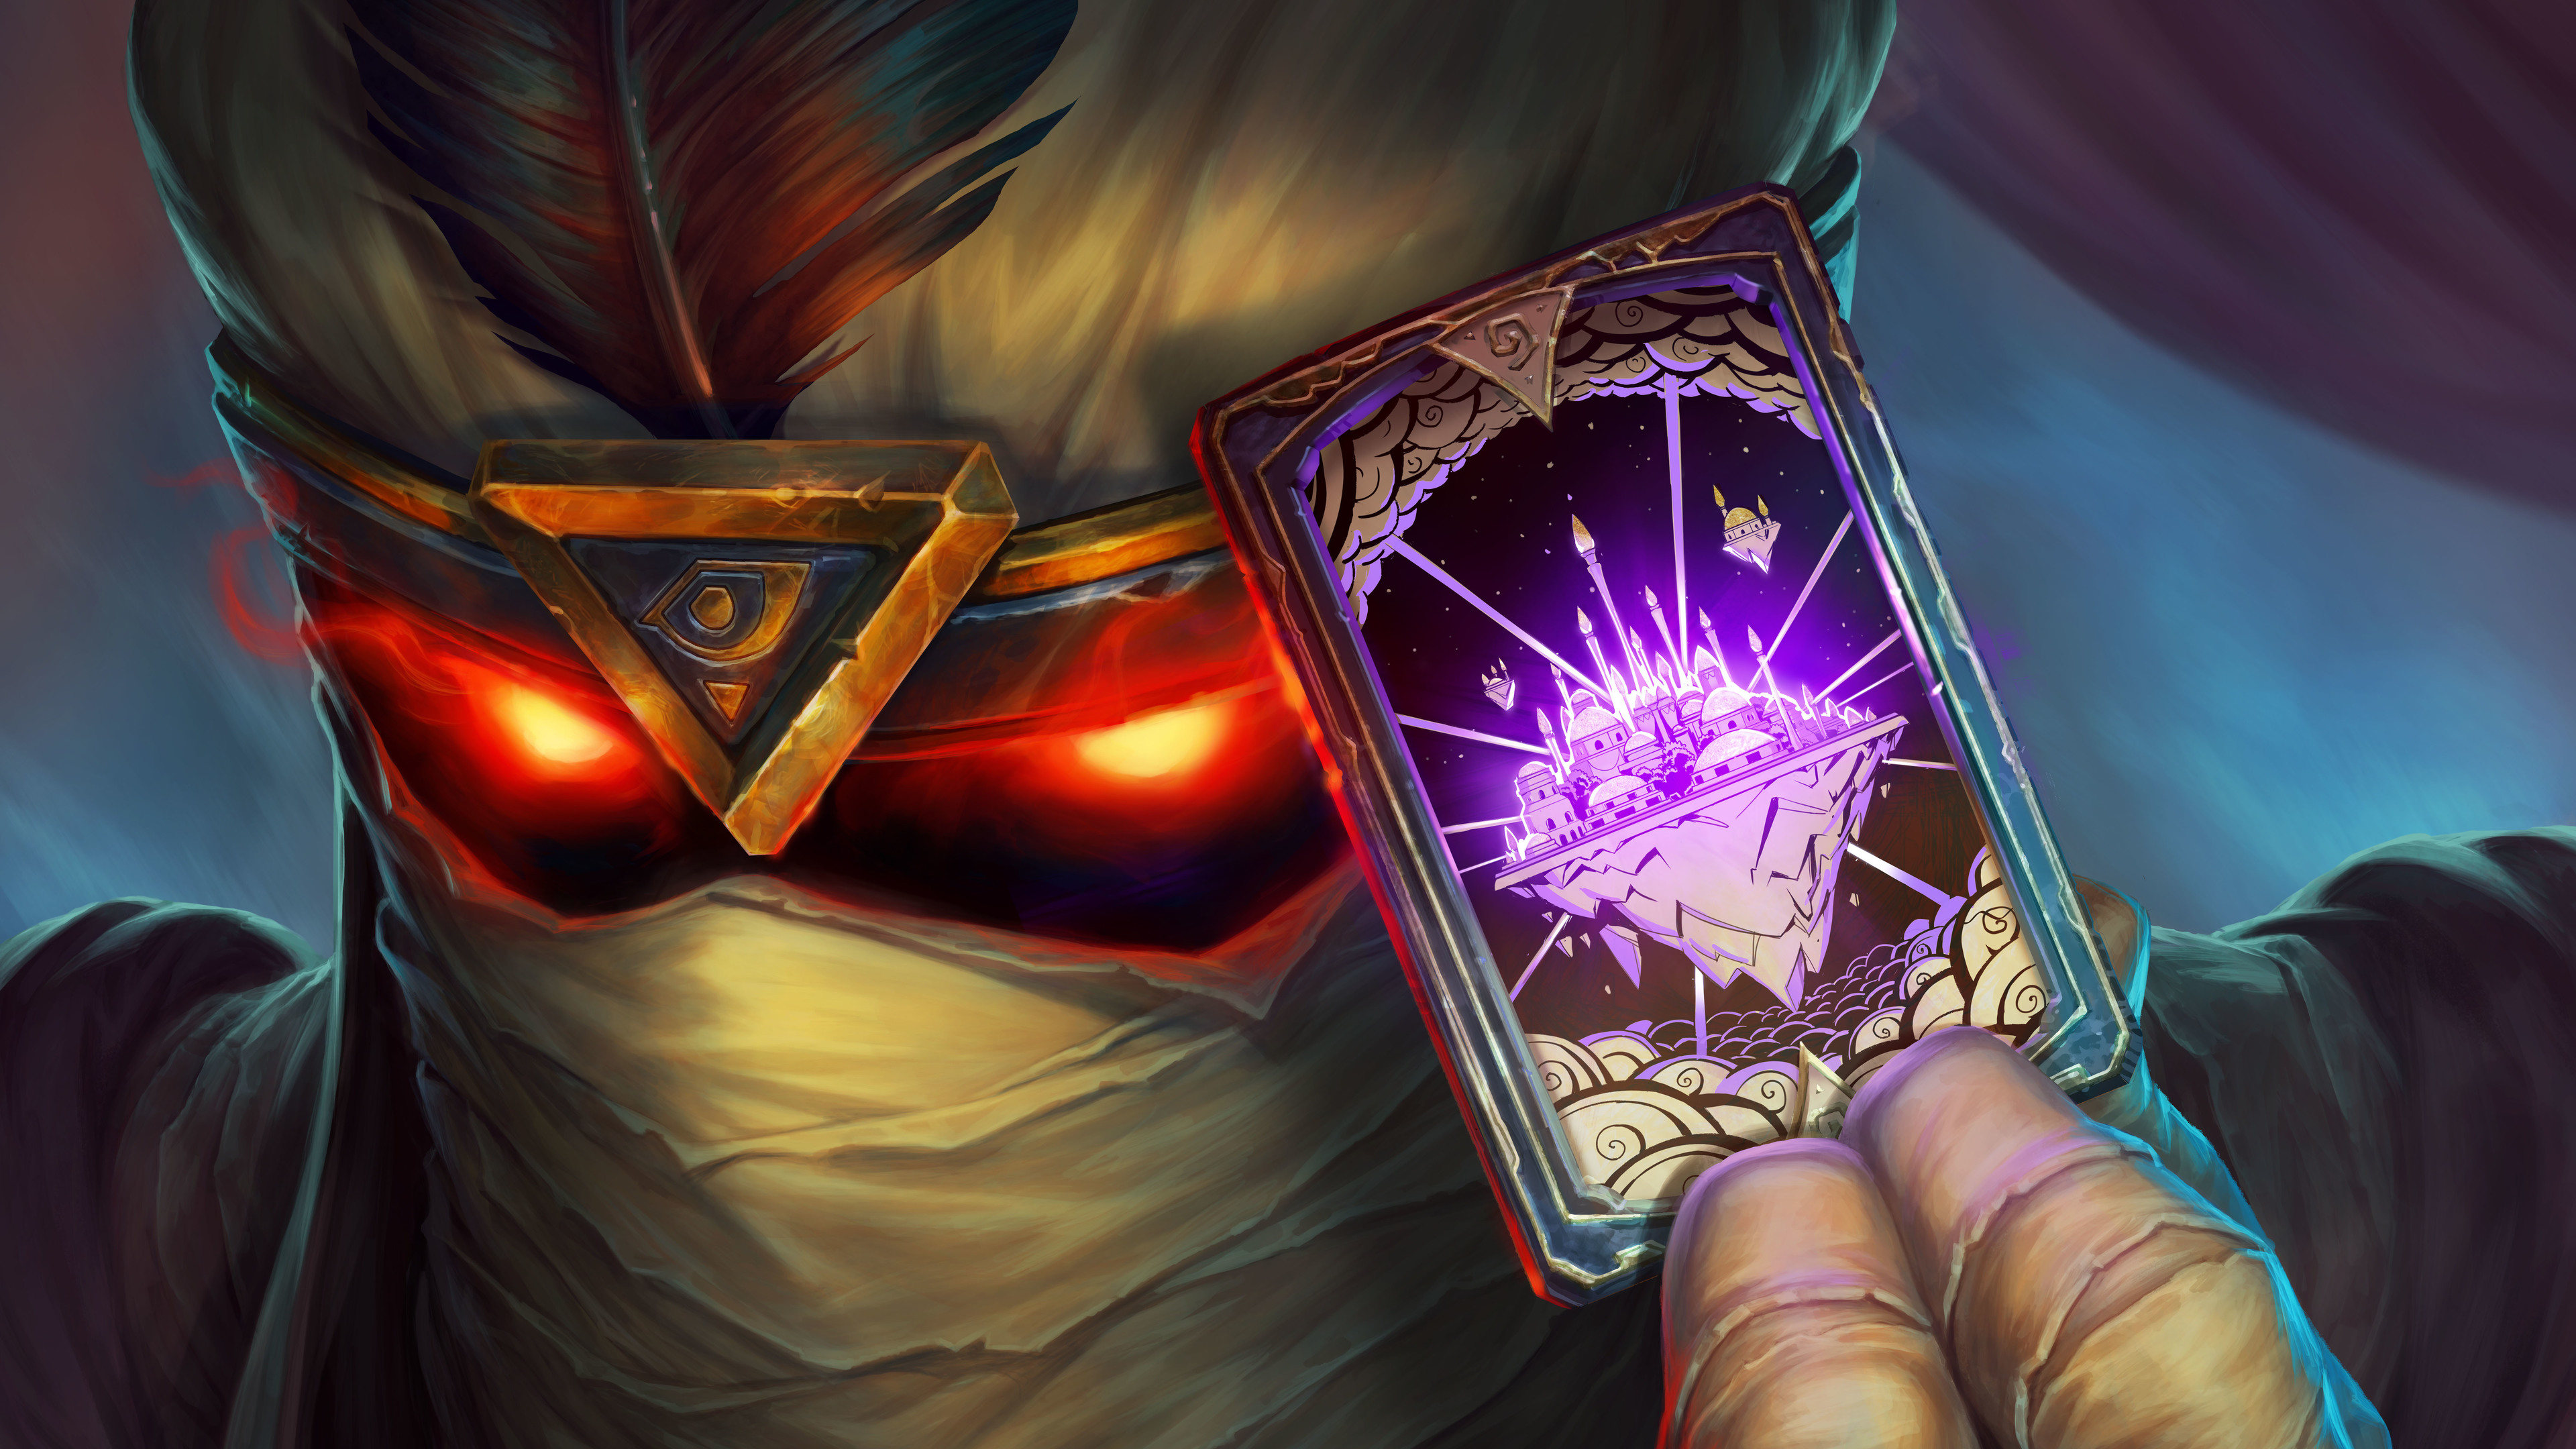 Rise of Shadows Wallpapers  Desktop  Mobile Versions High Quality HD   Hearthstone Top Decks